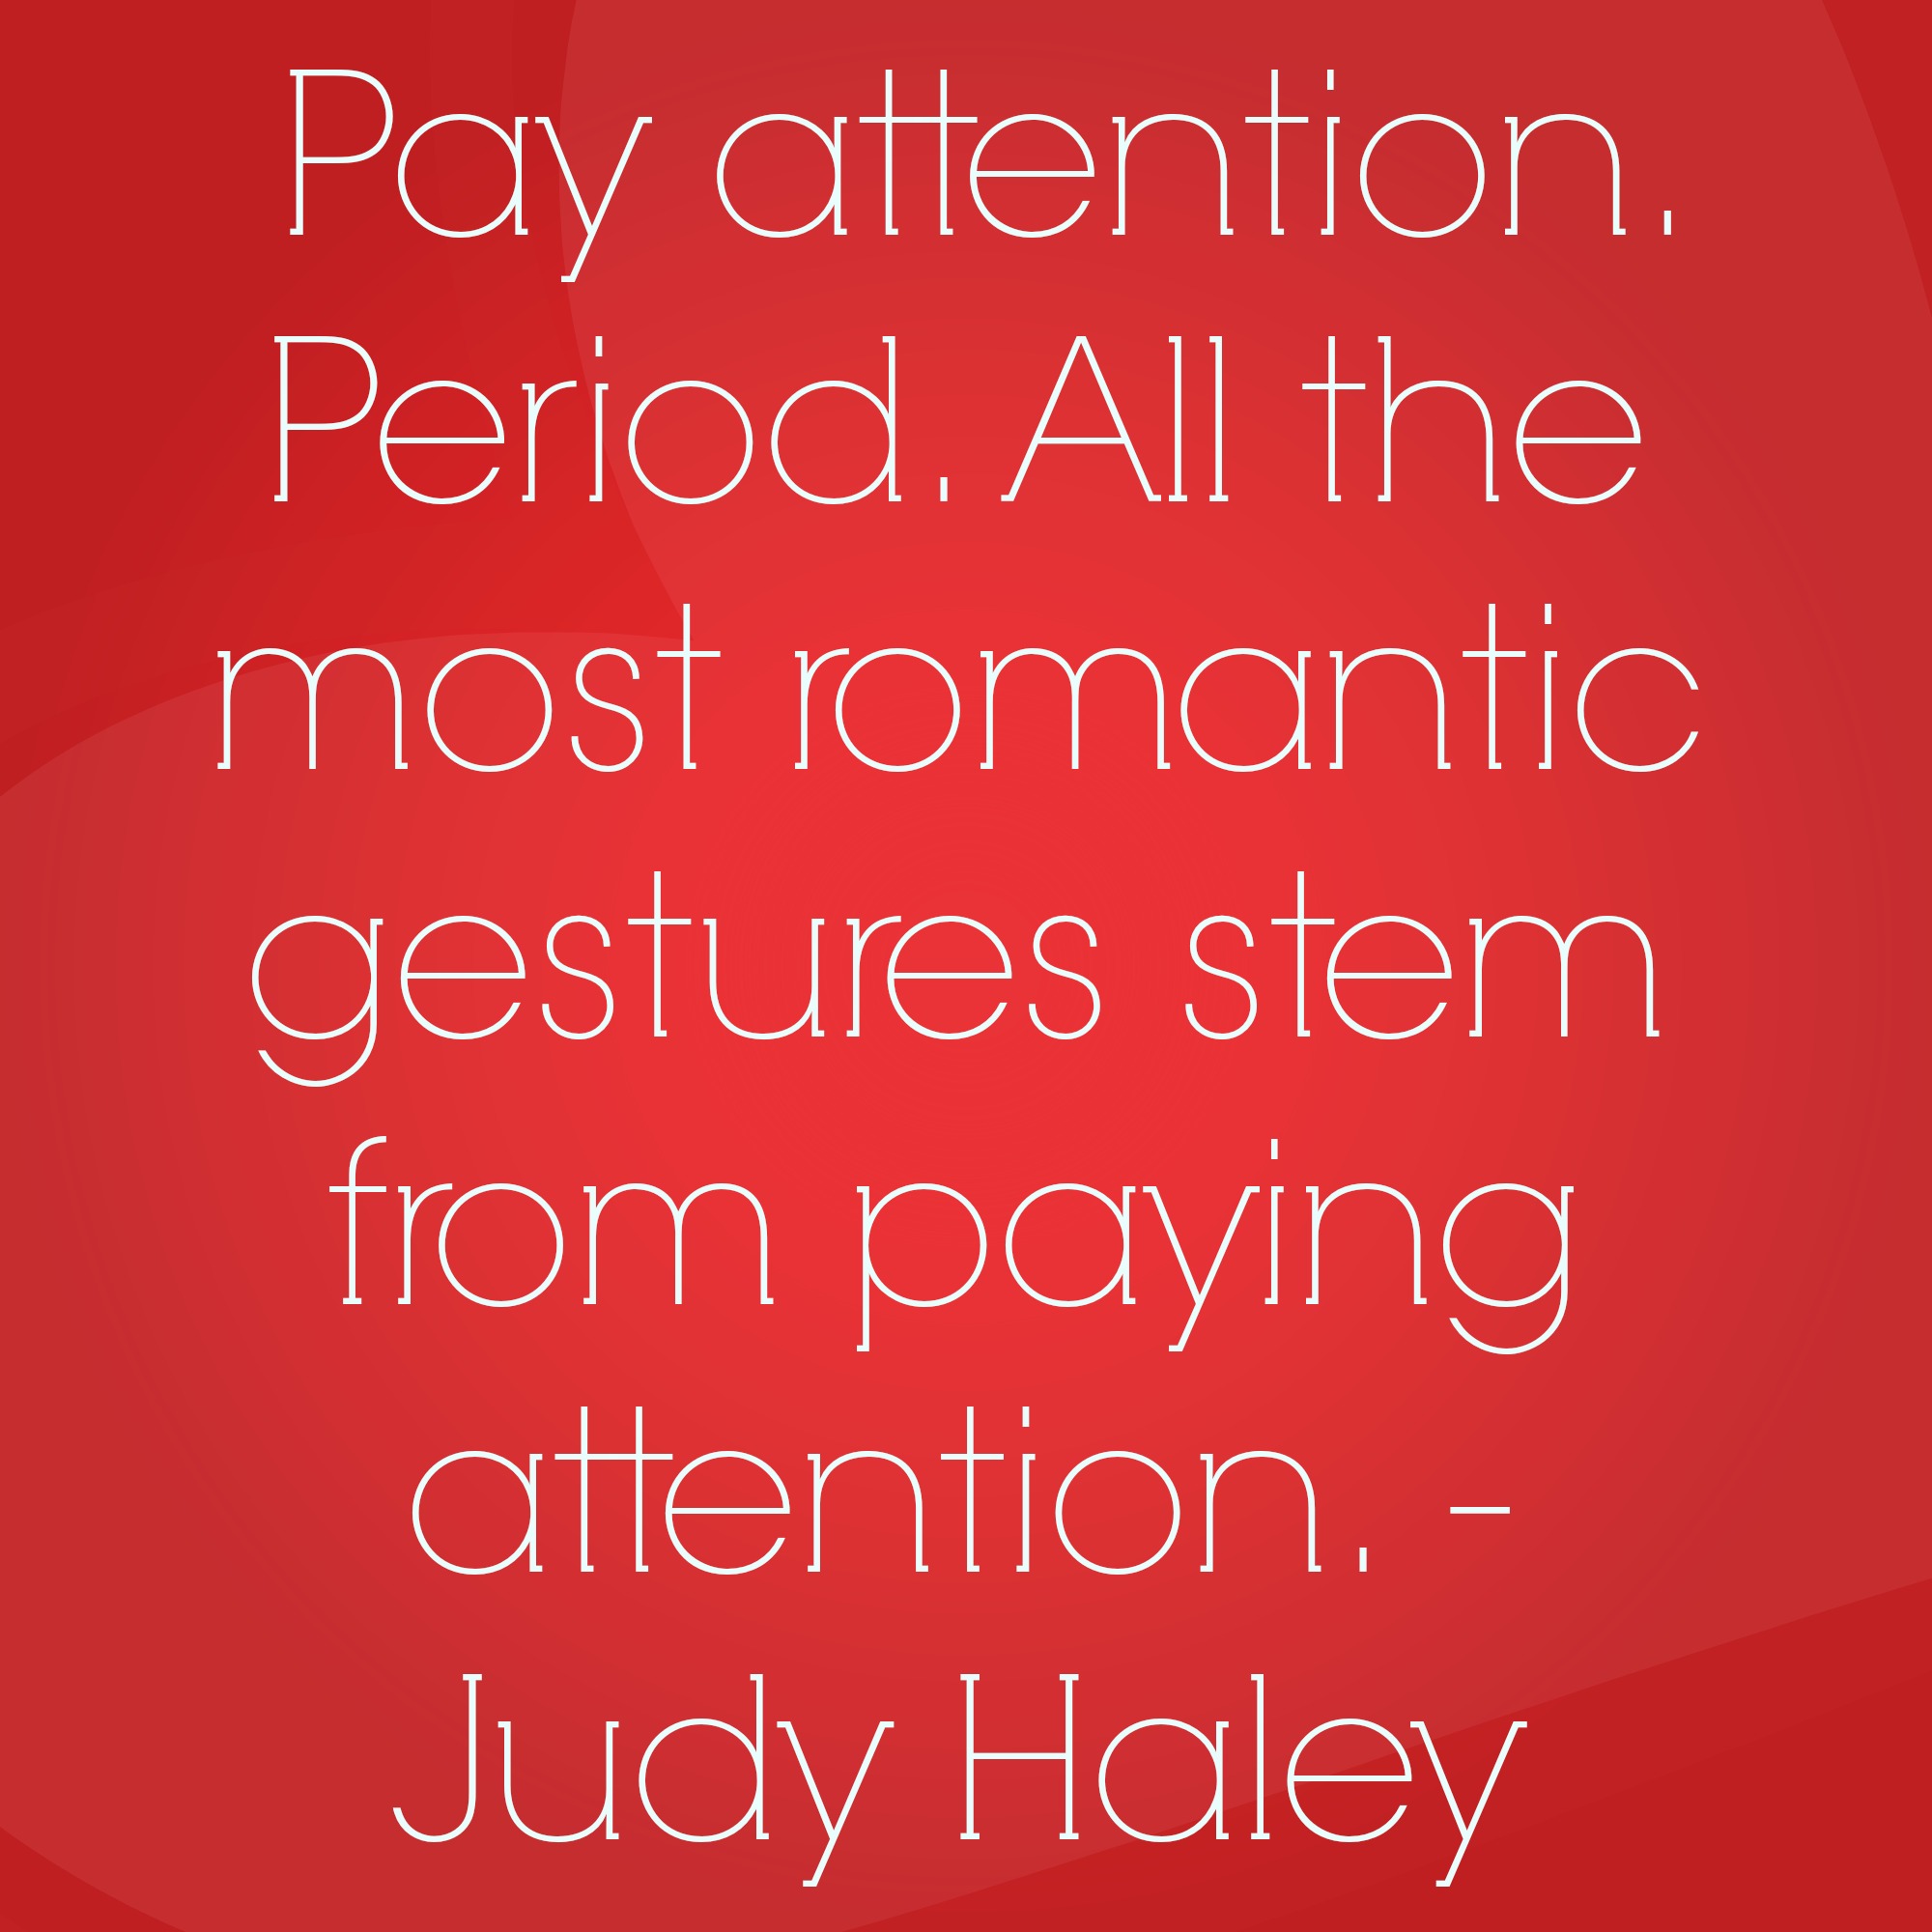 Pay attention, period. All the most romantic gestures stem from paying attention.